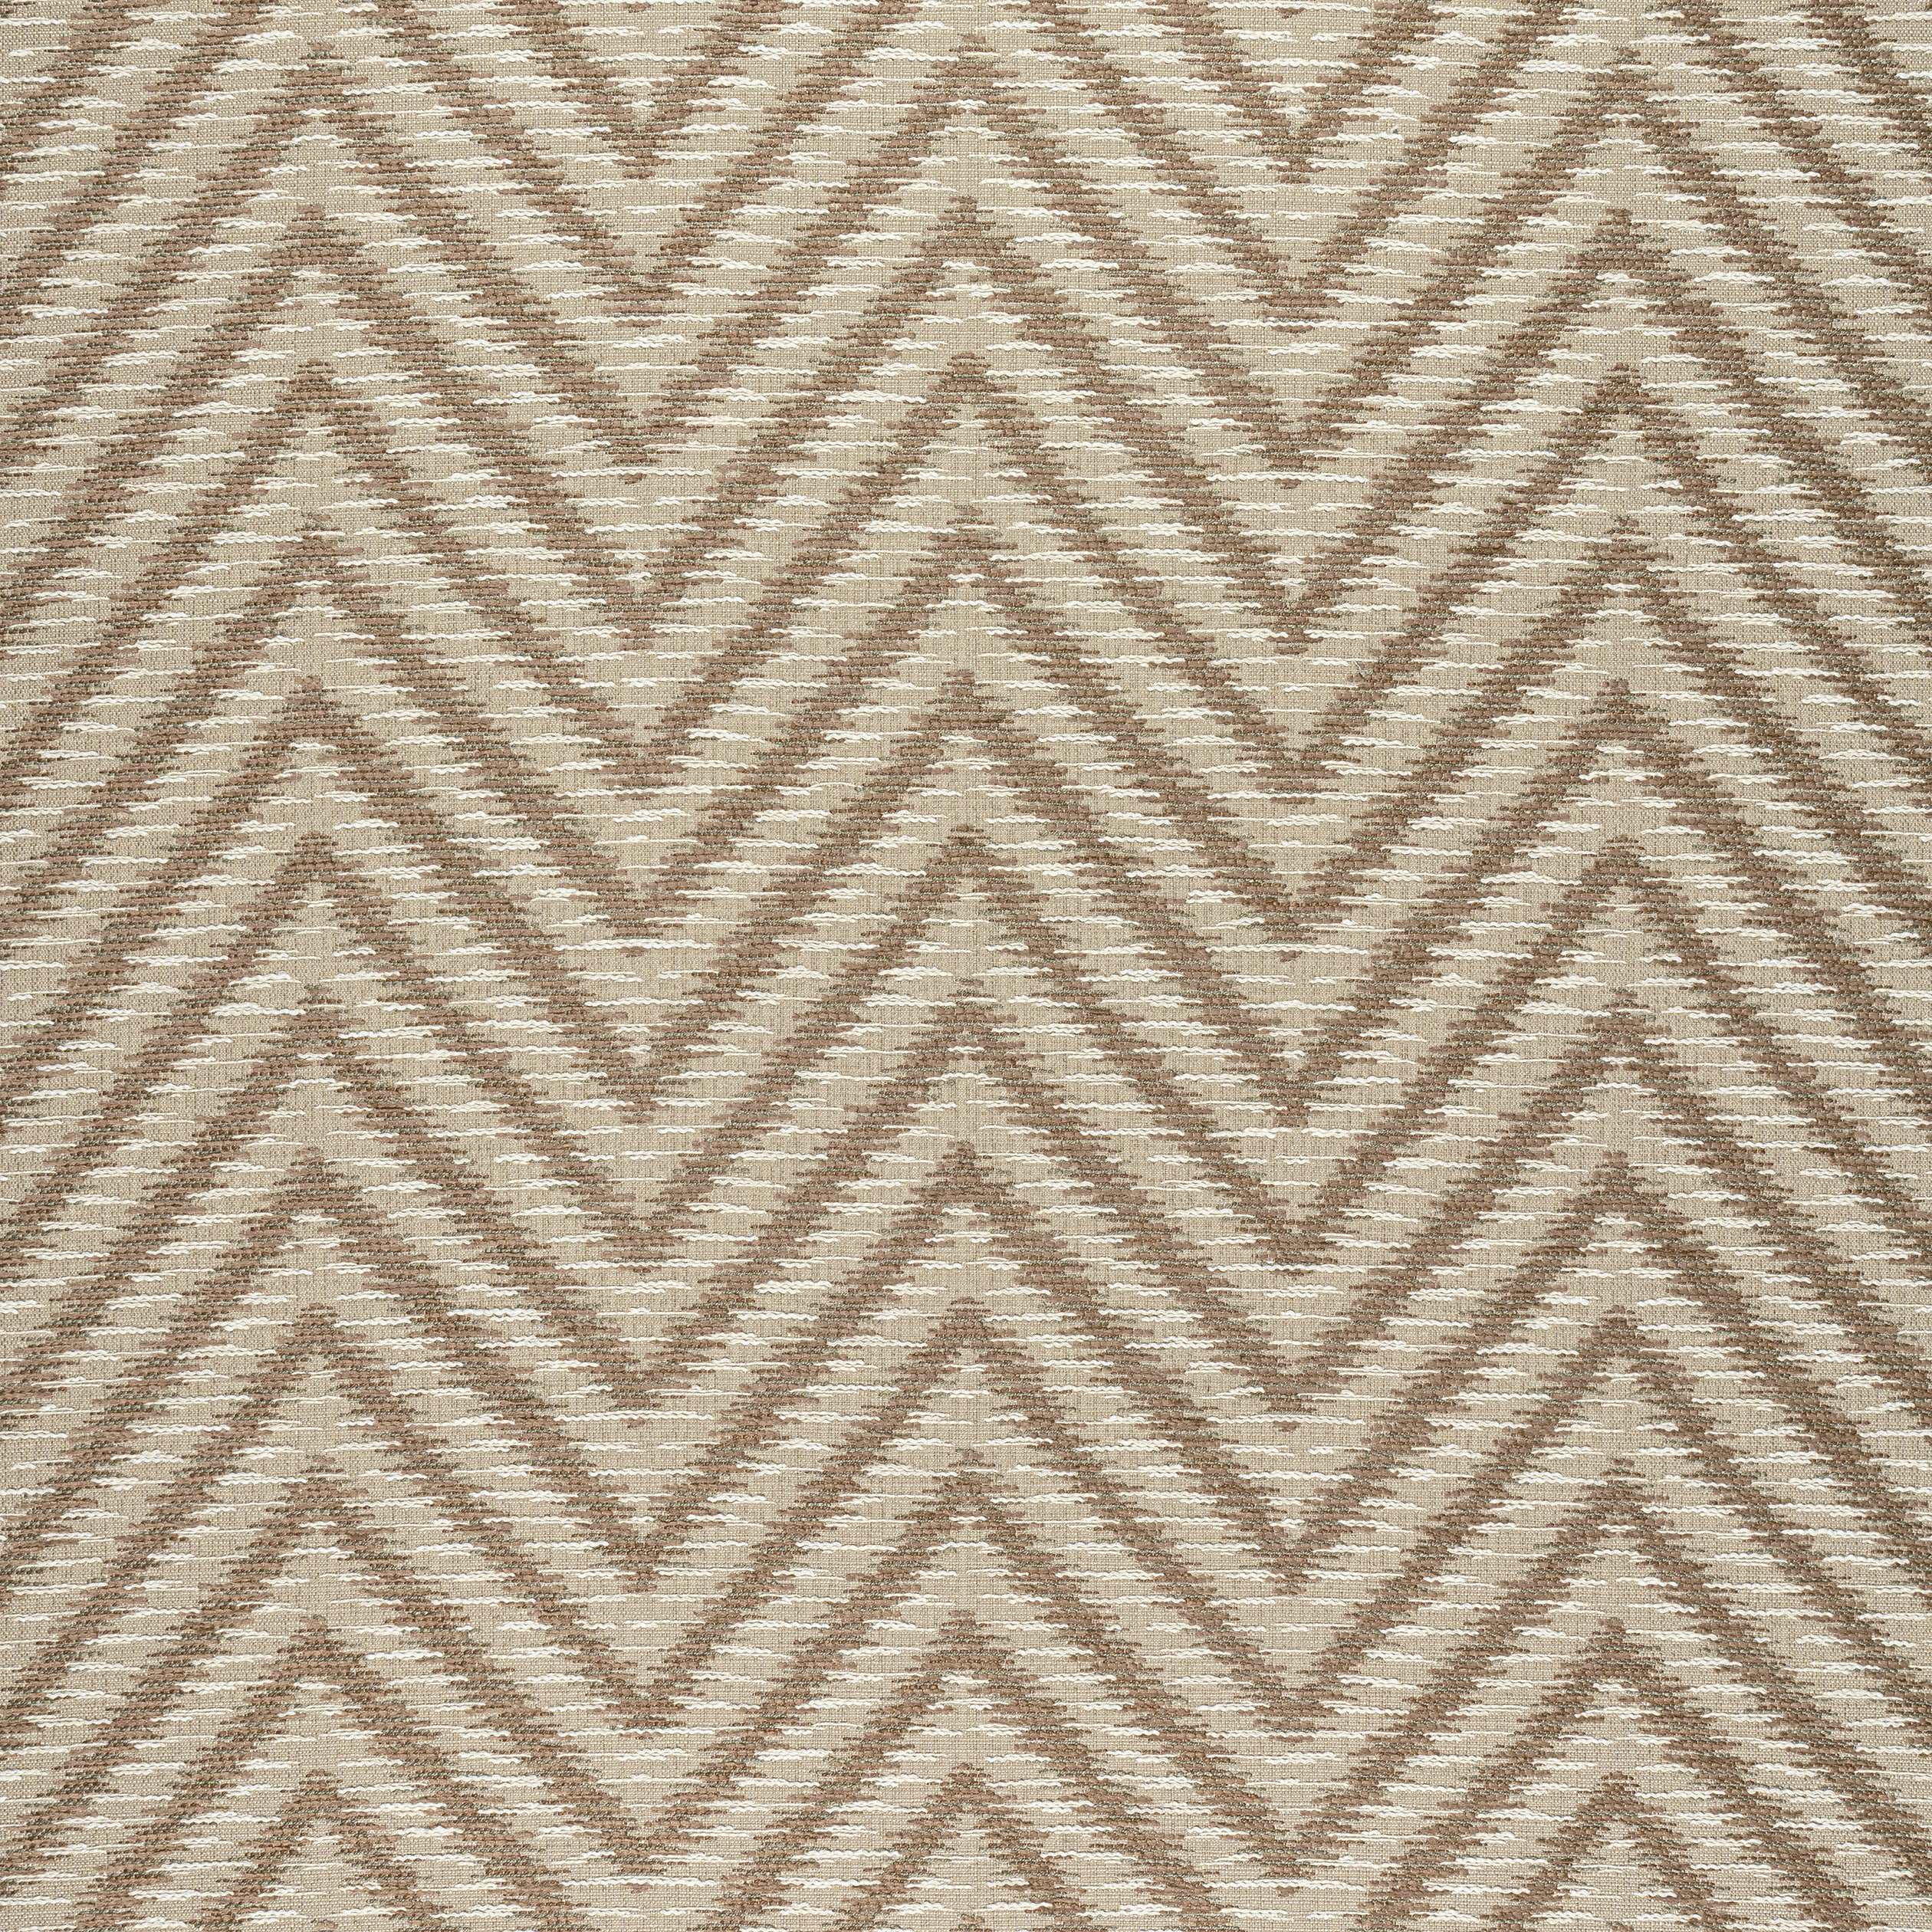 Aliso fabric in mocha color - pattern number W8822 - by Thibaut in the Haven collection